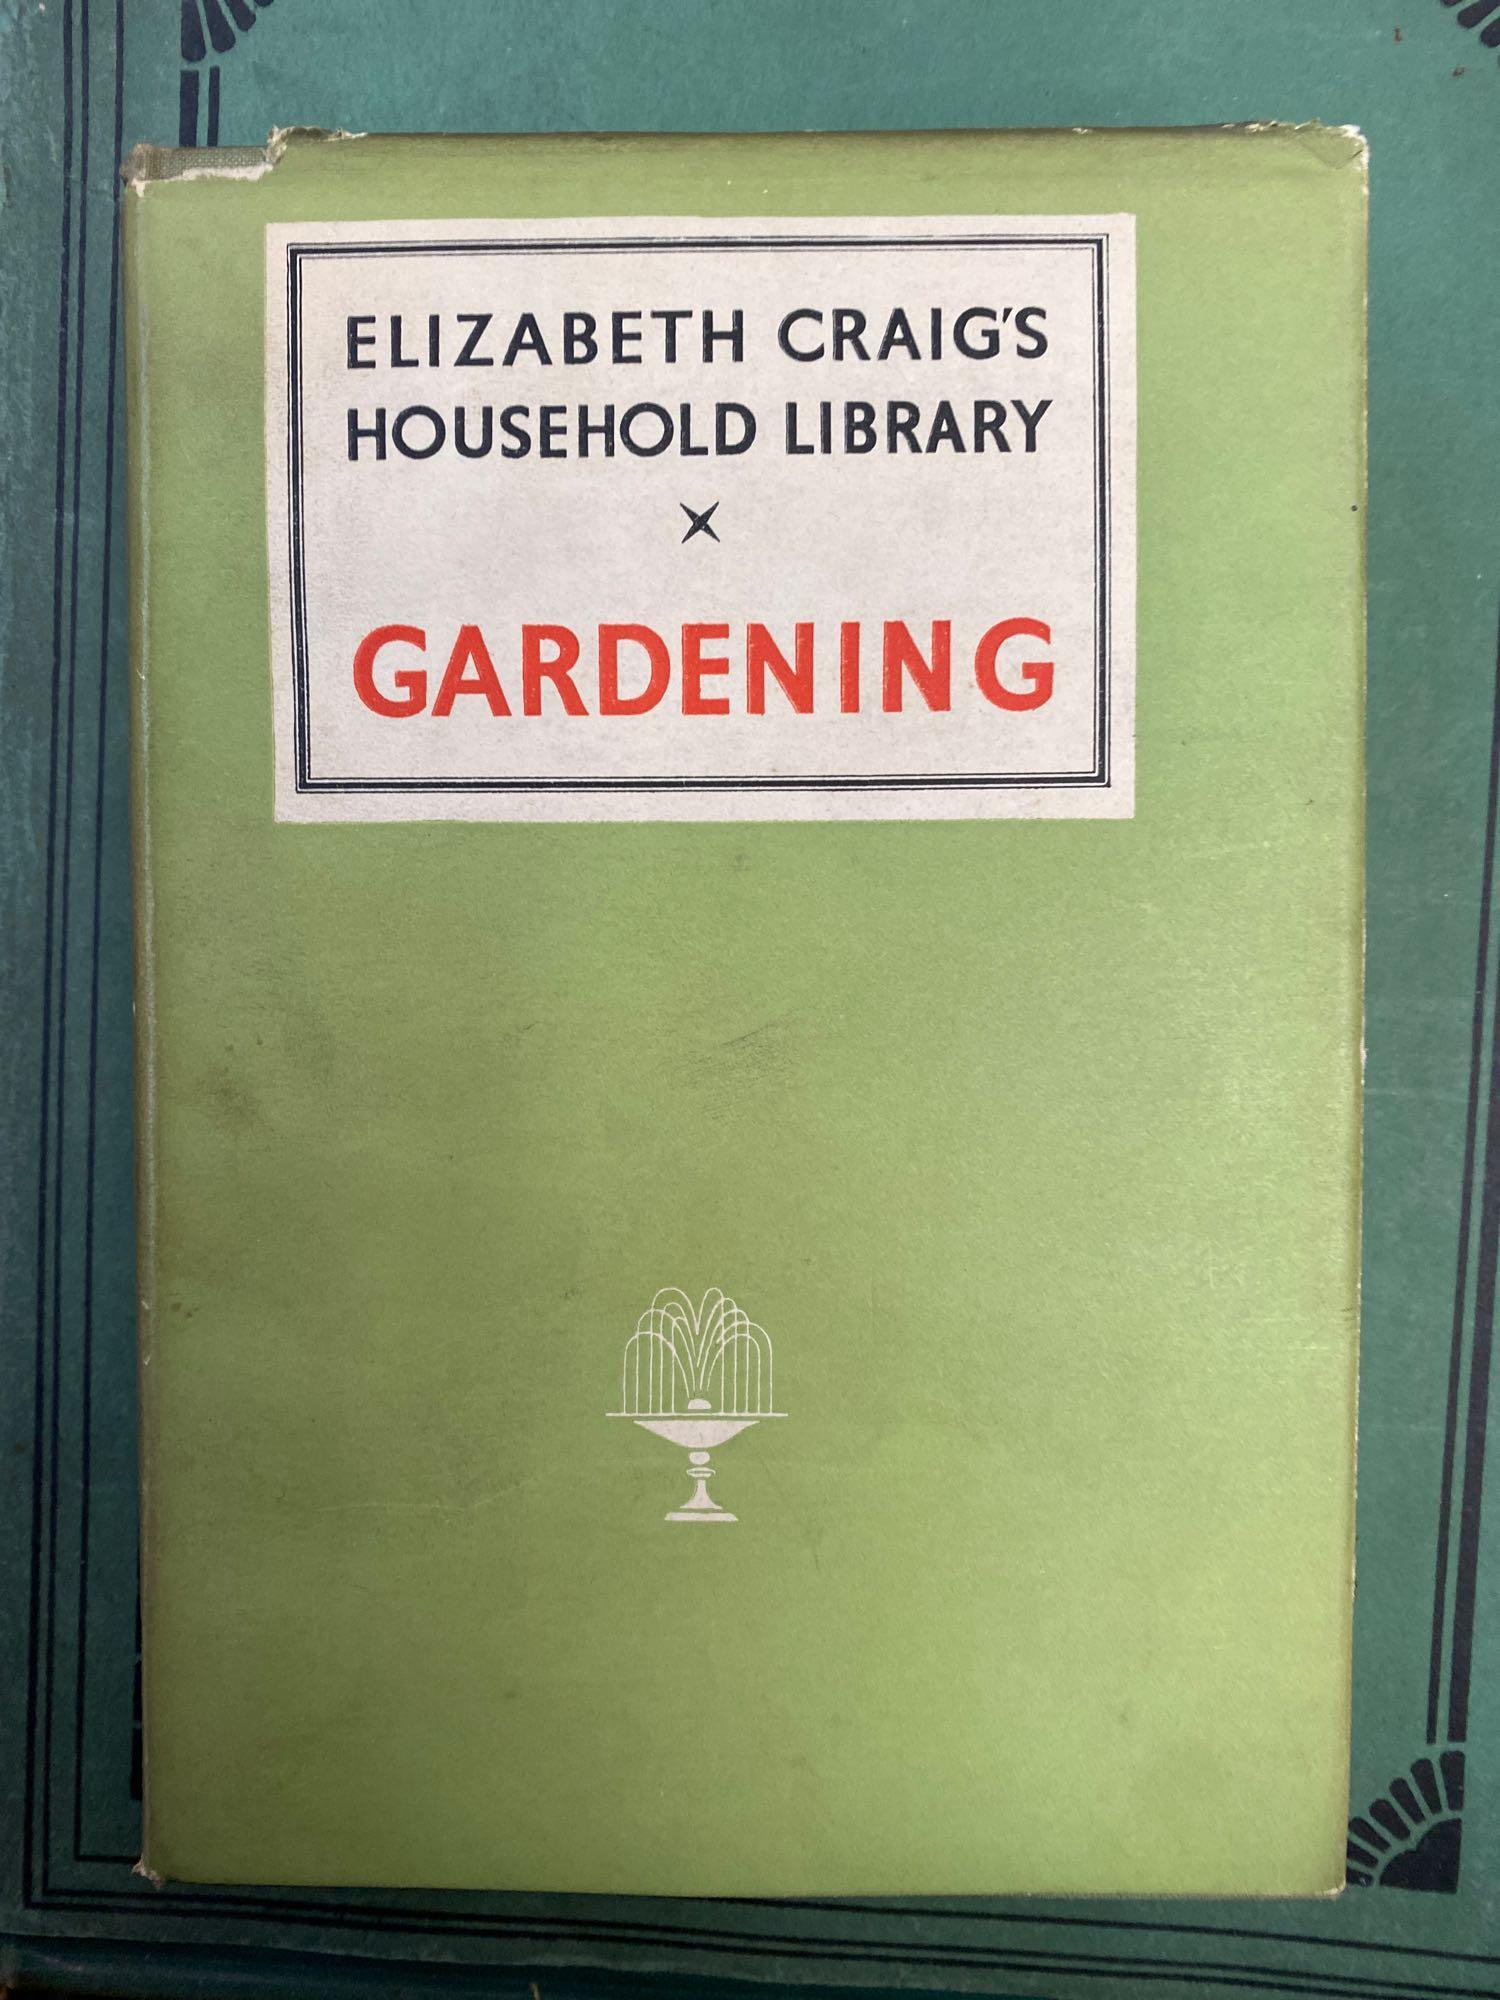 The Popular Encyclopedia of Gardening and other books - Image 5 of 11